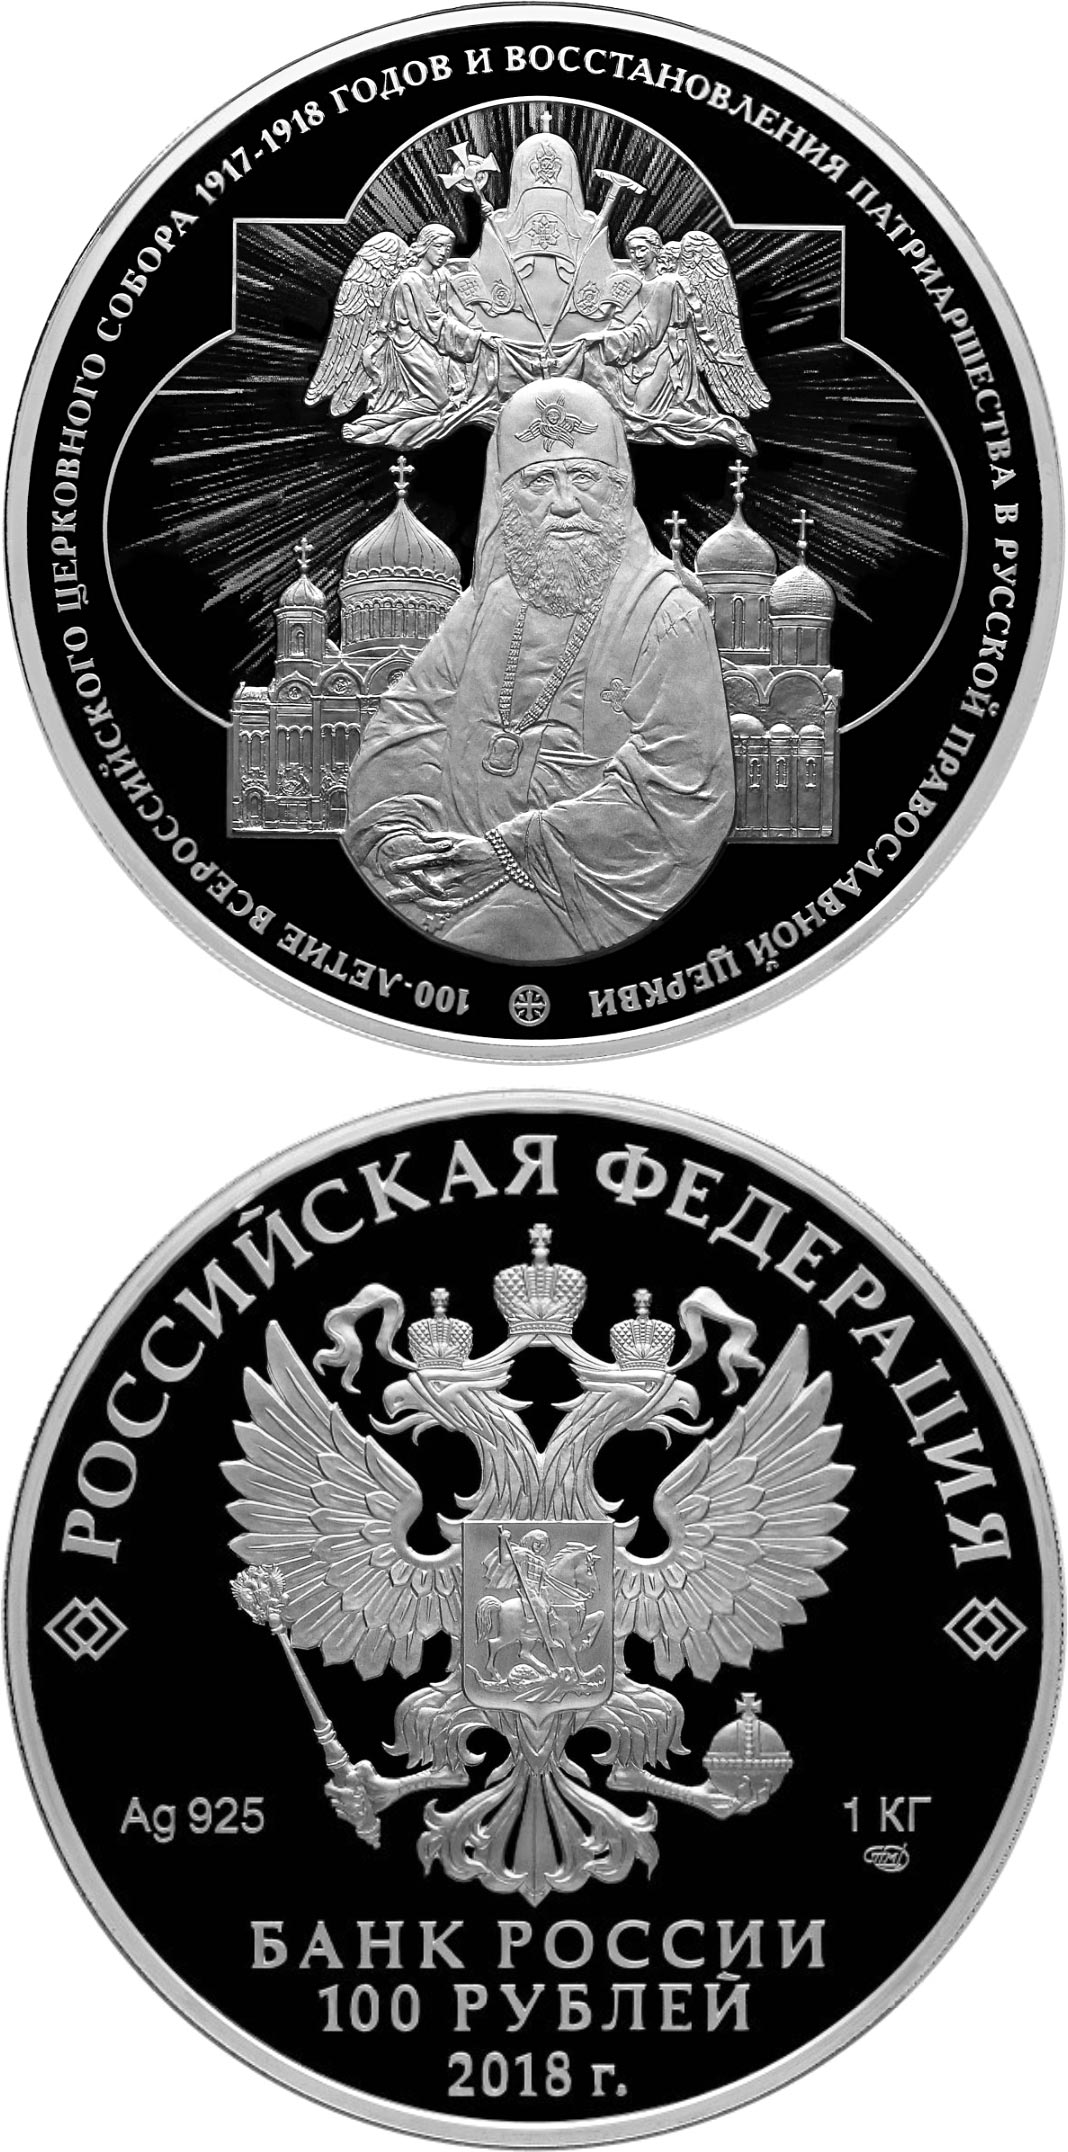 Image of 100 rubles coin - Centenary of the All-Russian Church Council of 1917–1918 and the Restoration of the Patriarchate in the Russian Orthodox Church | Russia 2018.  The Silver coin is of proof-like quality.